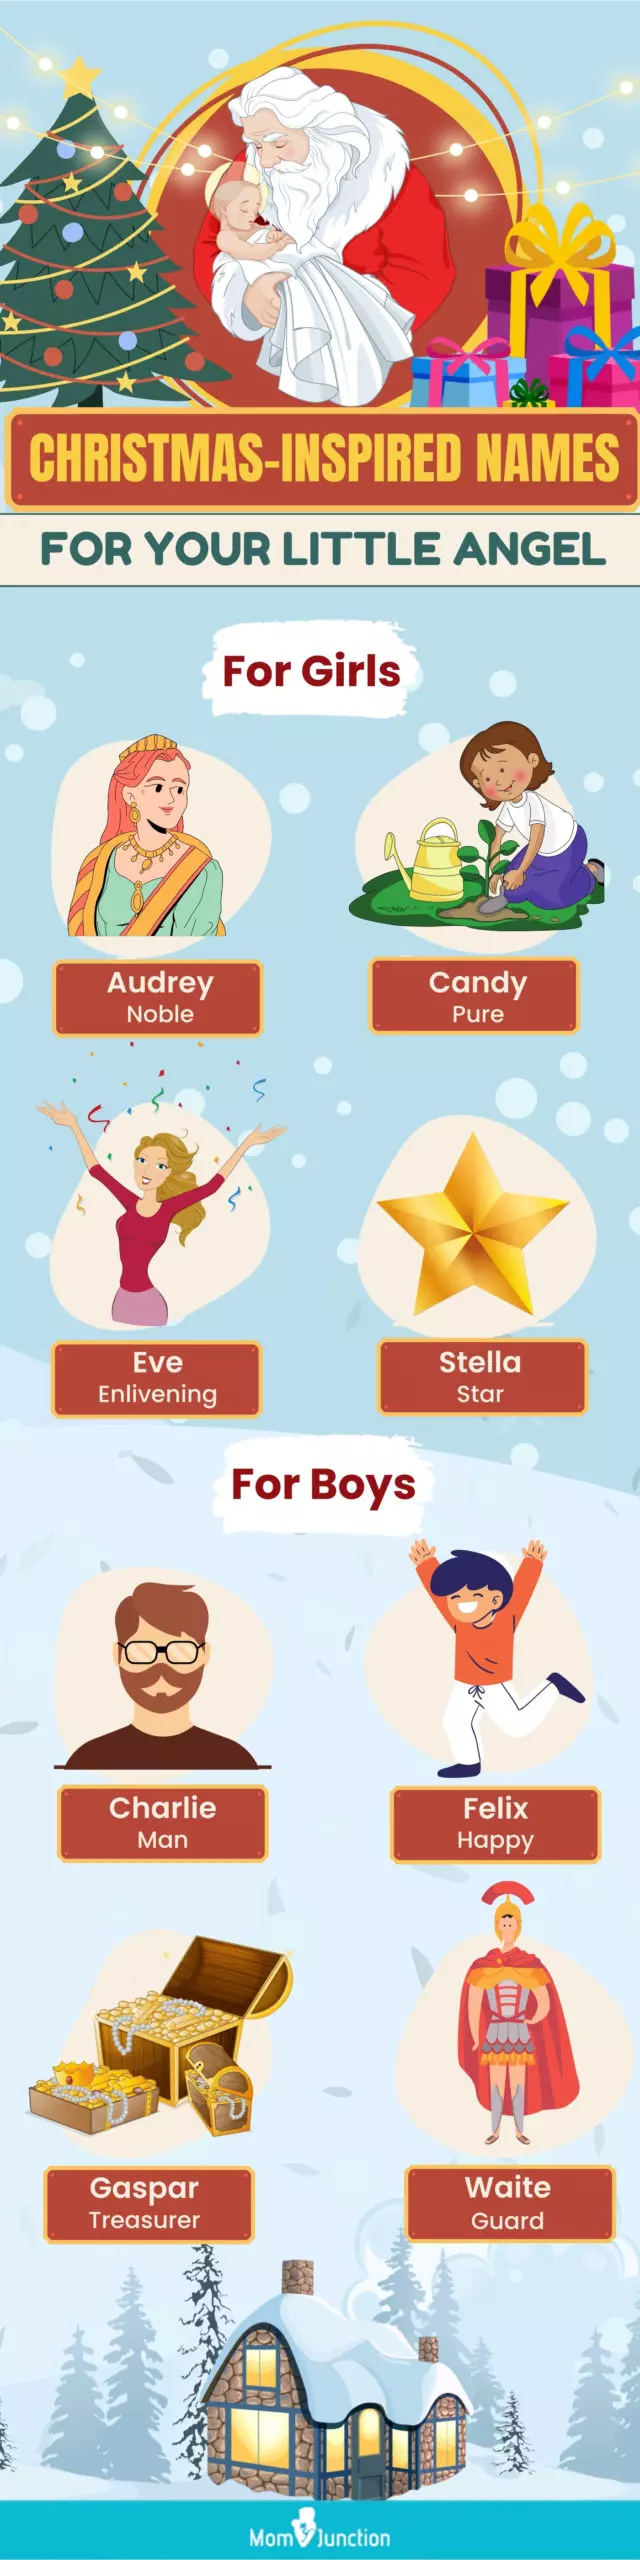 christmas inspired names for your little angel (infographic)